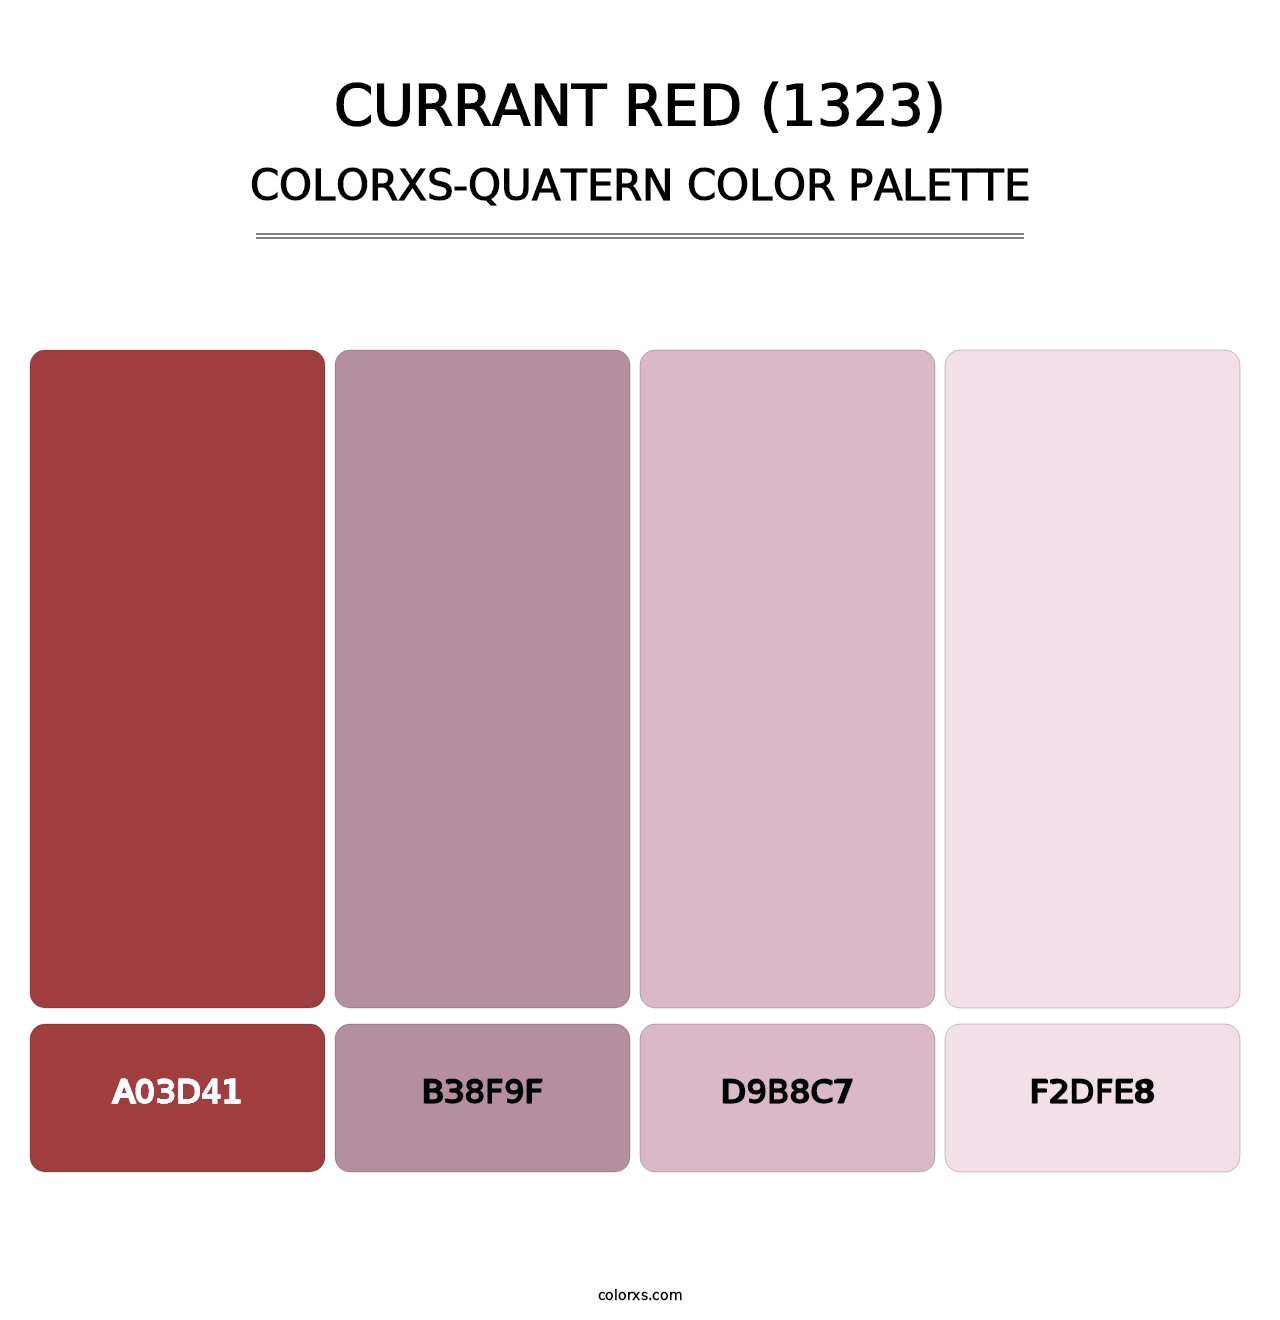 Currant Red (1323) - Colorxs Quatern Palette